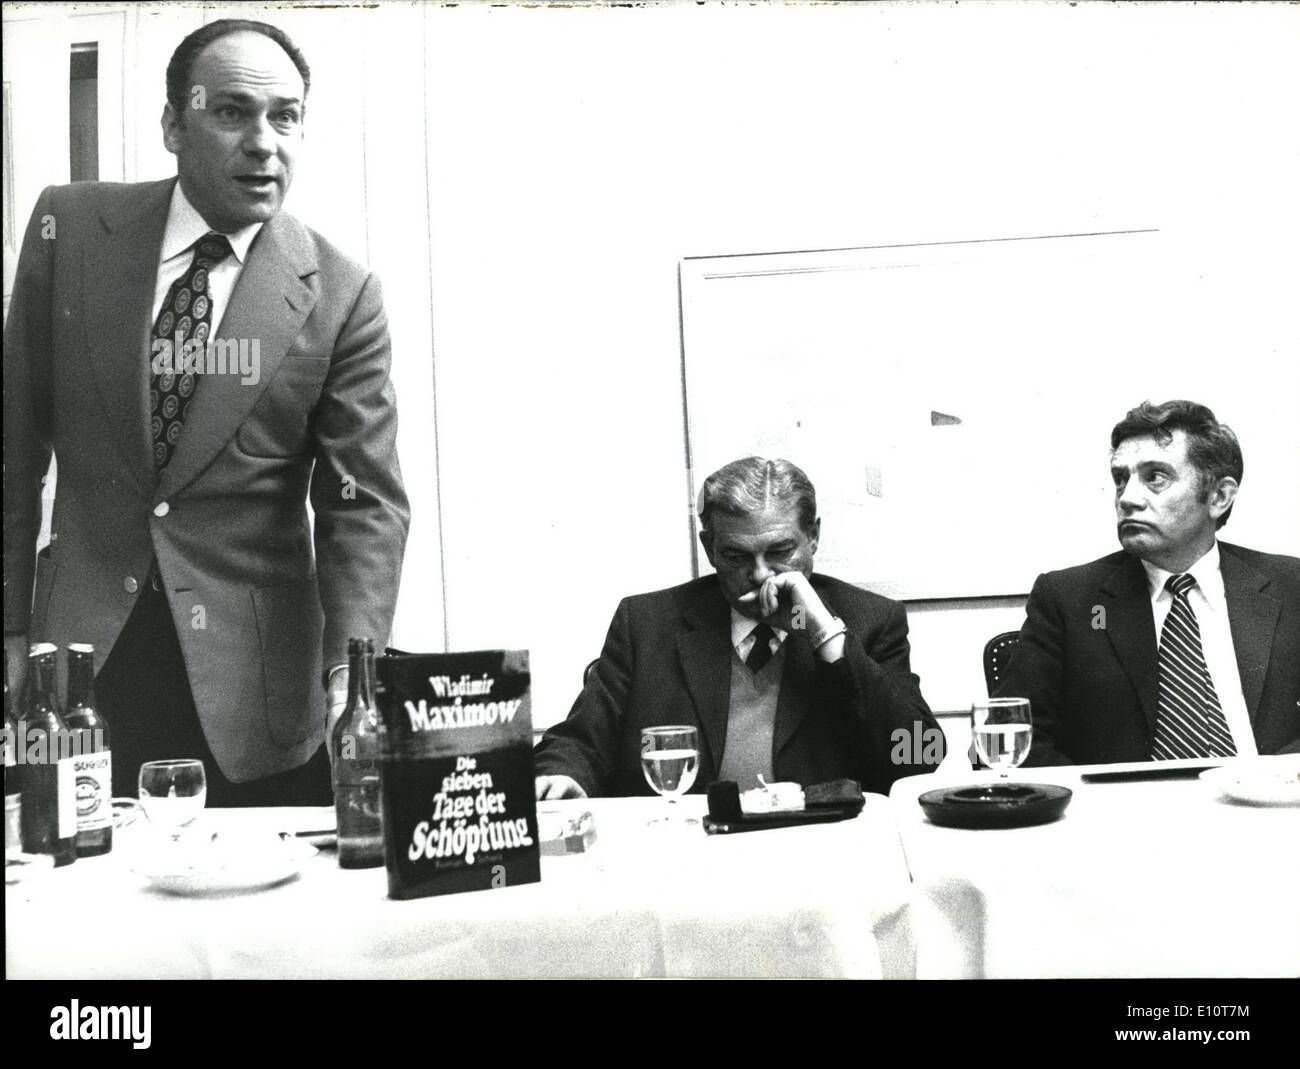 Mar. 03, 1974 - Wladimir Maximow: ''I Chose The West'': Sowjet writer Wladimir Maximow who left Sowviet Union ten days ago for western Europe, held a press conference with his swiss editor - Schorz (left) in Berne, where he stated that he chose to live in the West, standing before the alternative: soviet camp or the West. In the middle his German translator Georg Bruderer, right Wladimir Maximow. Stock Photo